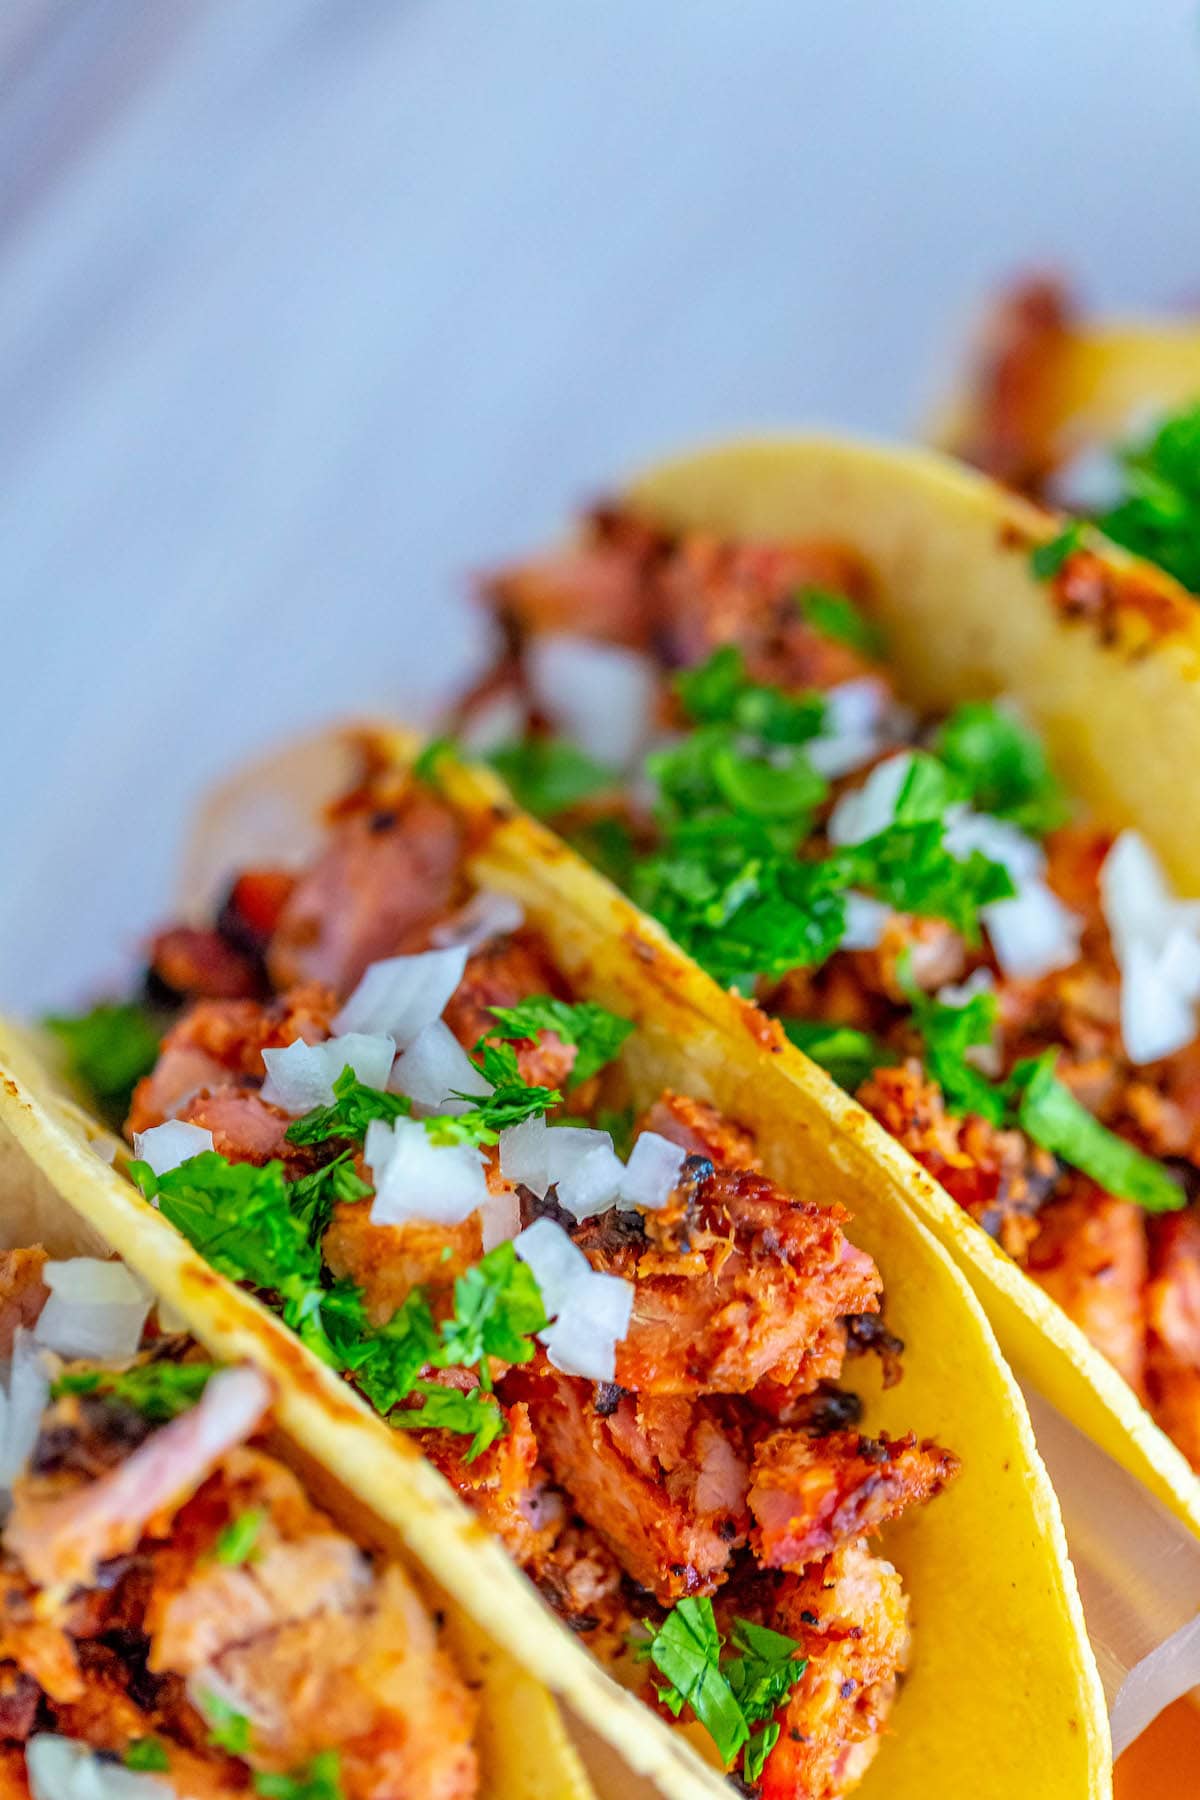 picture of chopped smoked al pastor in a taco topped with chopped cilantro and white onion